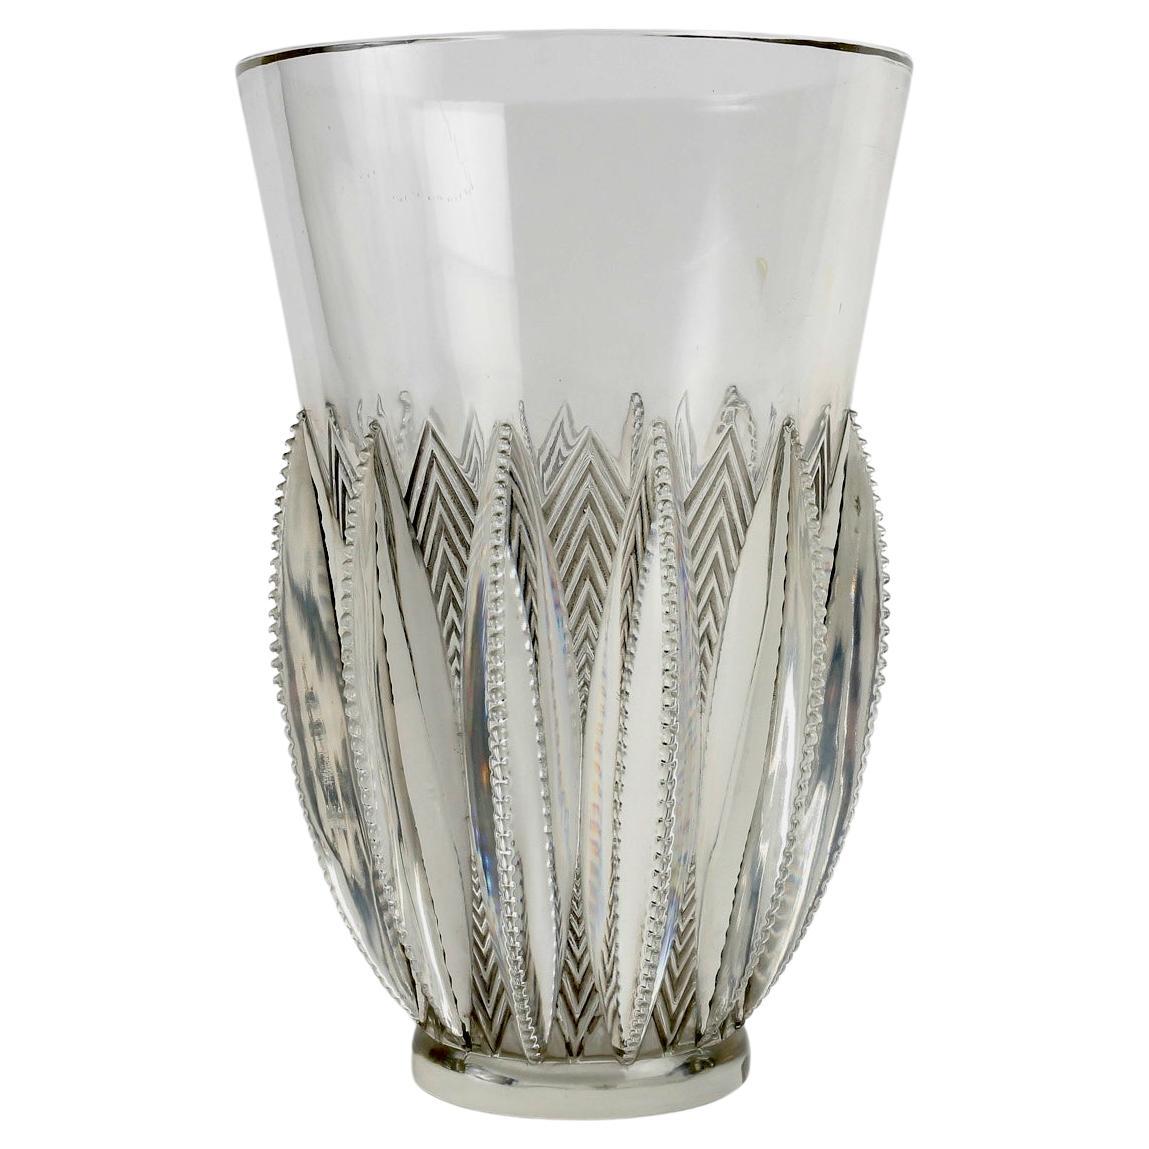 1934 René Lalique Vase Gerardmer Clear Glass with Grey Patina For Sale